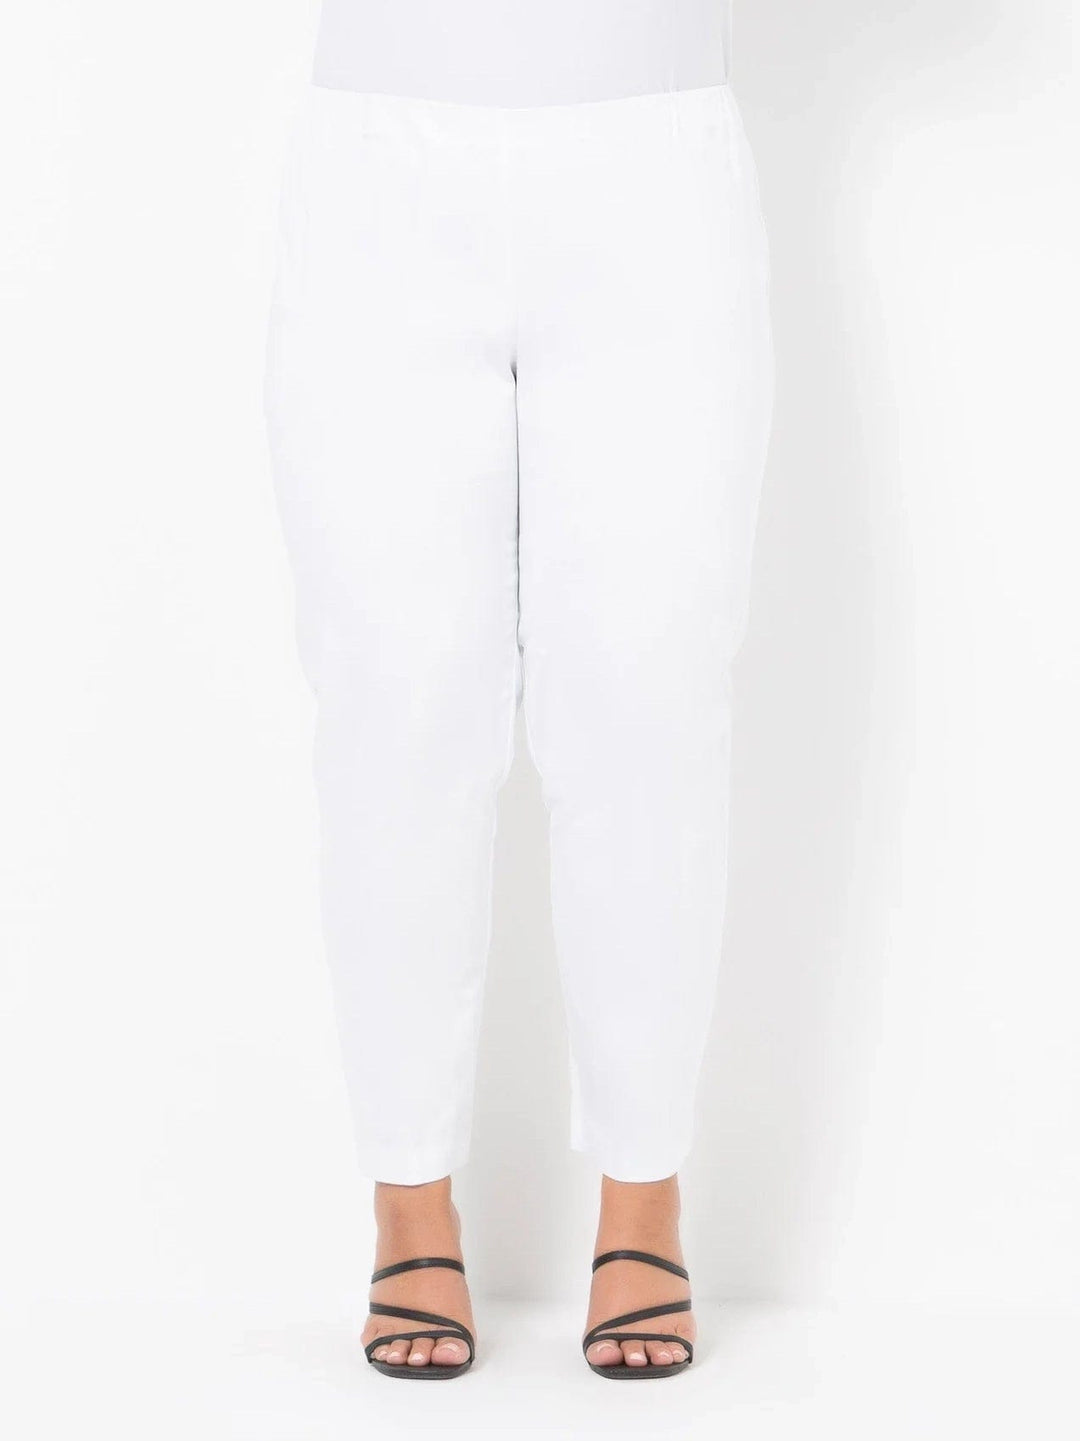 1053 Sateen Stretch 7/8 Pant